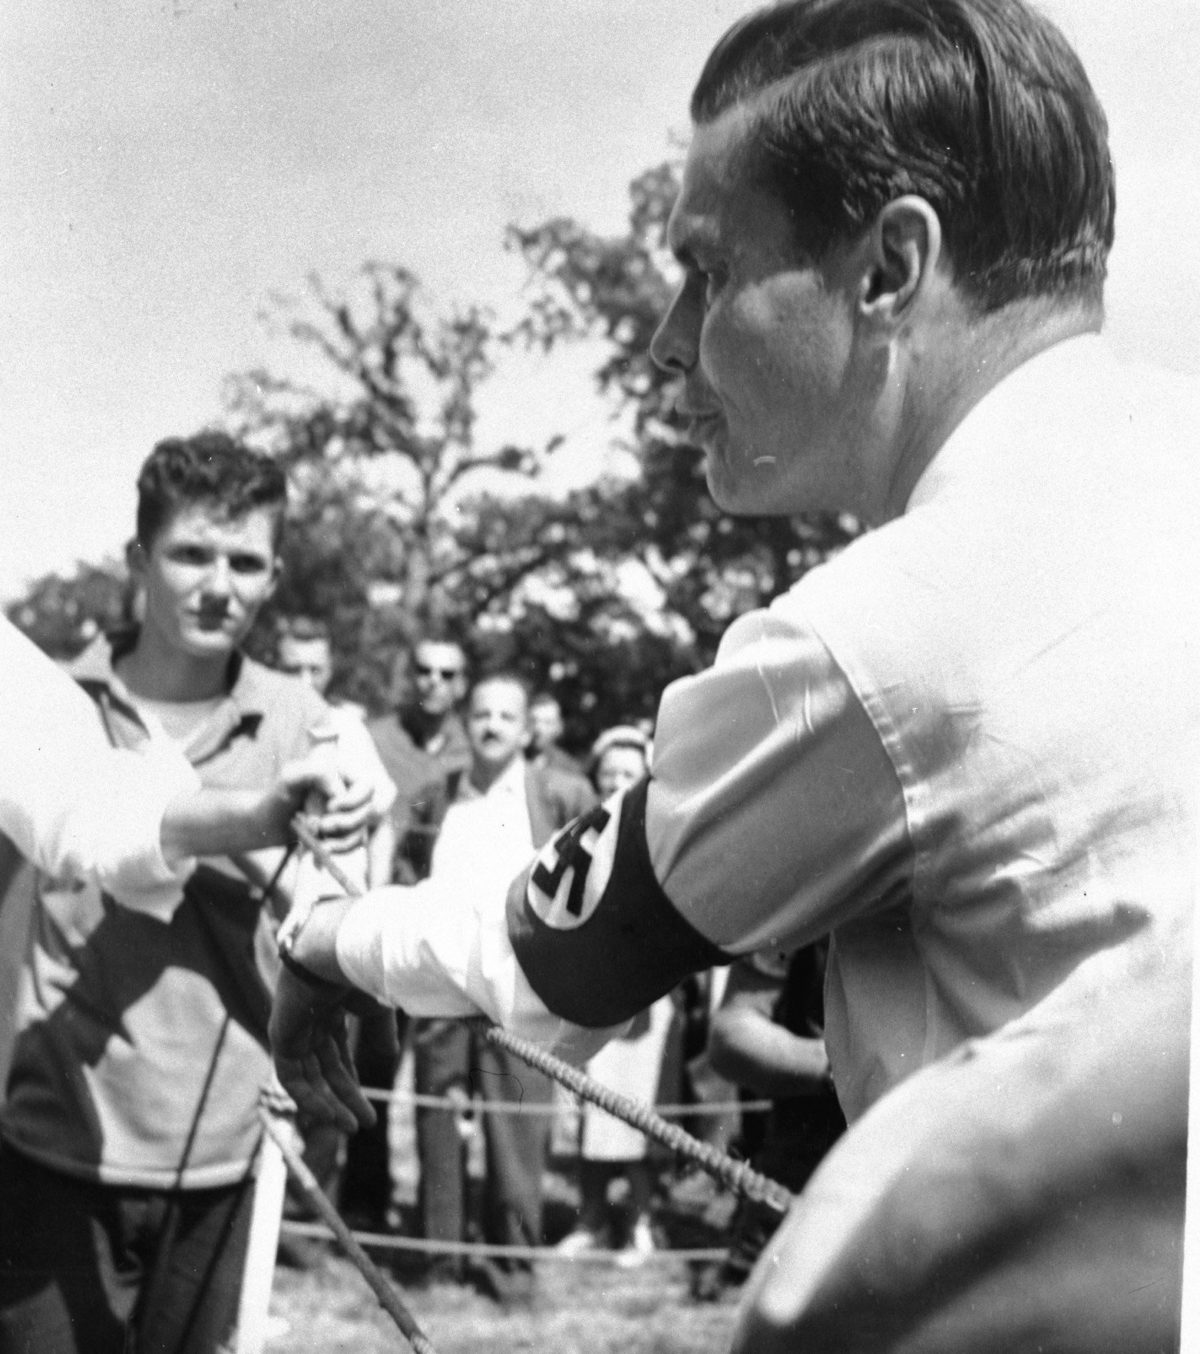 American Nazi Party leader George Lincoln Rockwell shown in a black and white photo addressing a small crowd wearing a swastika armband over the left arm of his white shirt. Rockwell's hair can be seen with a part combed into the left side of his head. Some trees are faintly visible out-of-focus behind the dozen or so spectators seen in frame. 